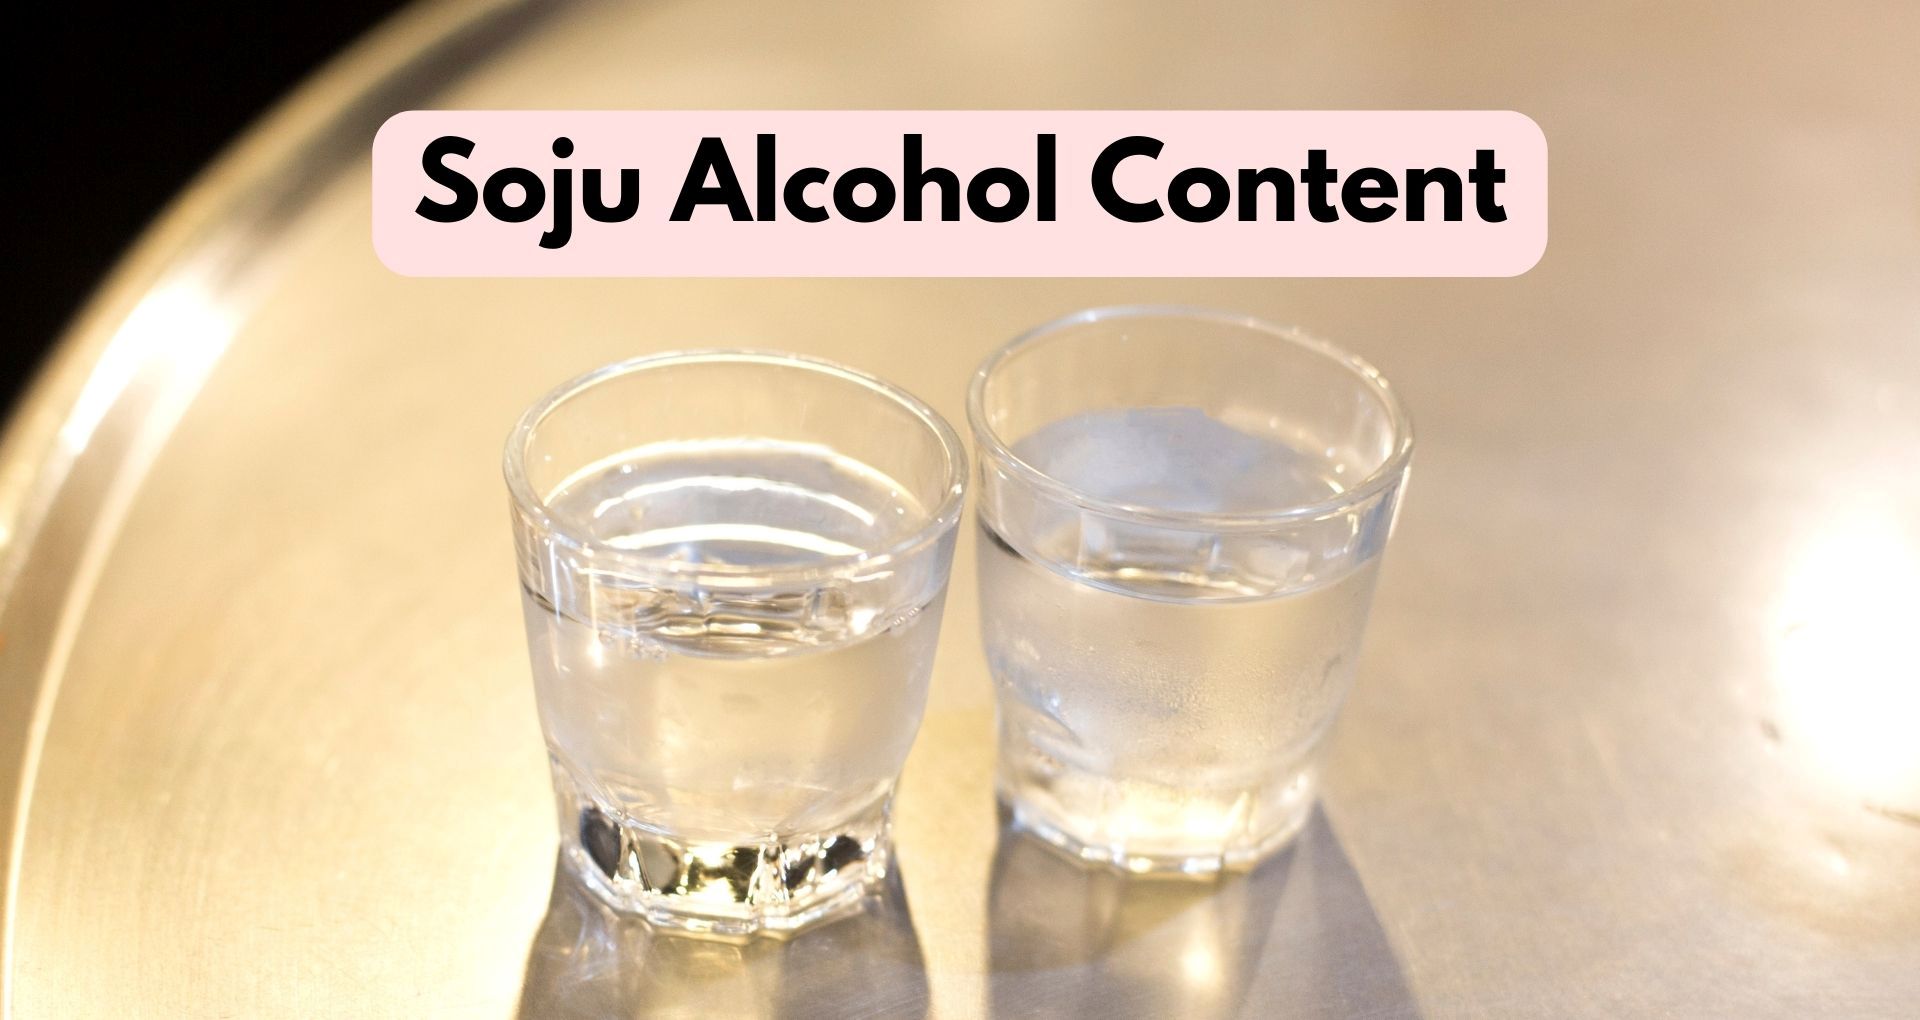 Soju Alcohol Content: What You Need To Know